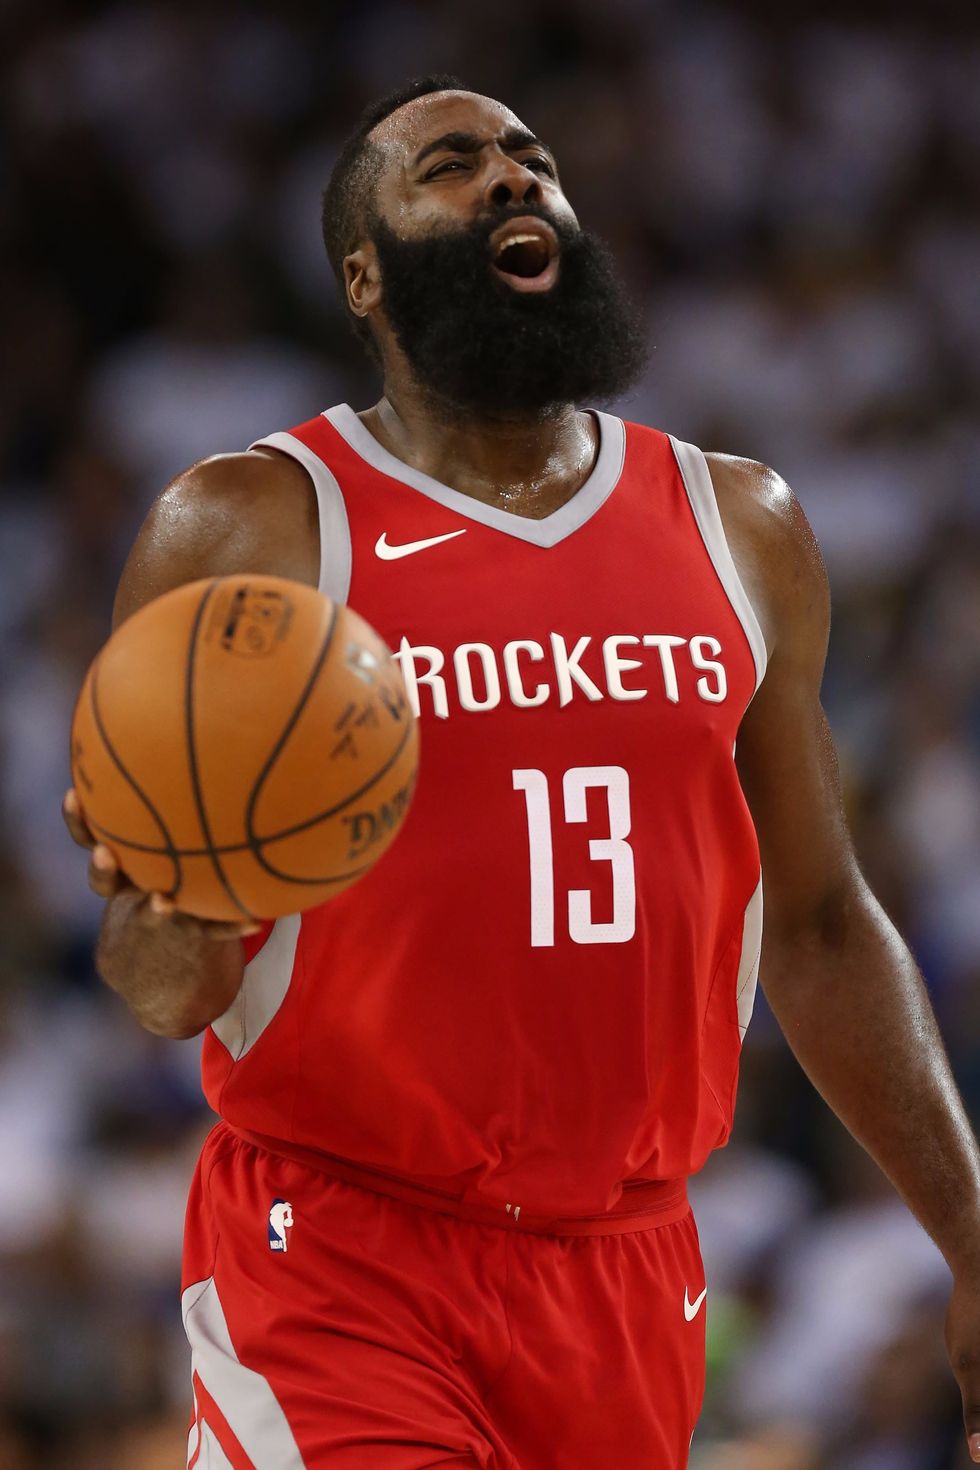 Joel Blank: An in-depth look at the Rockets going forward